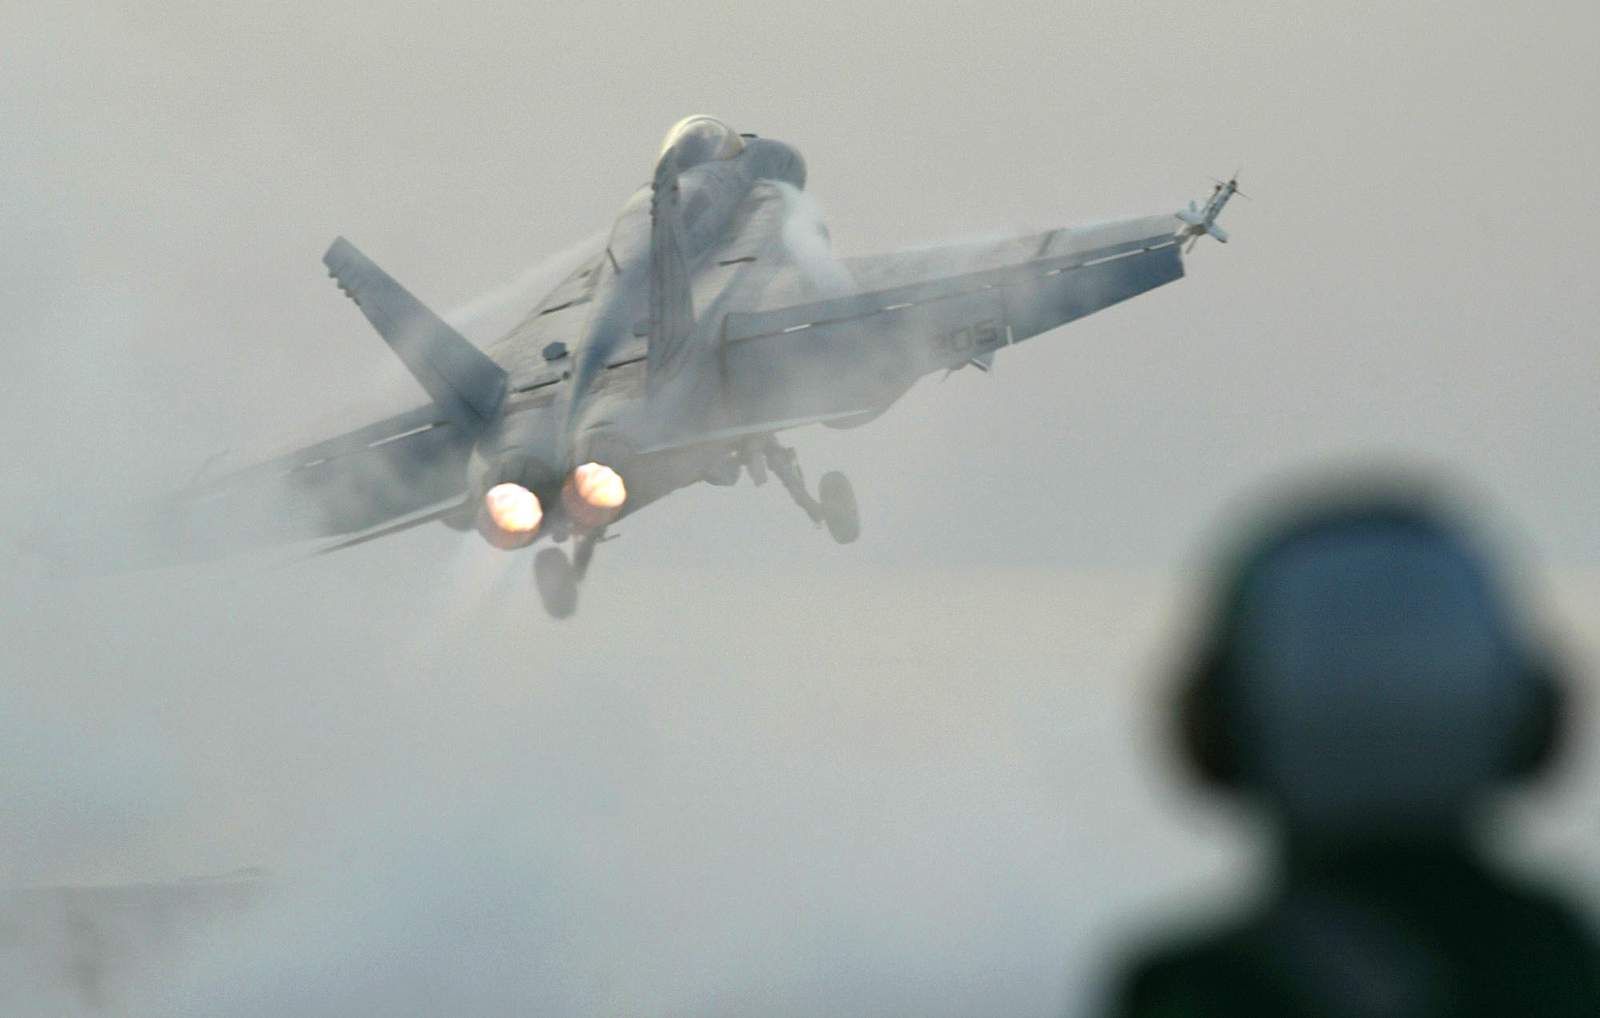 Navy jet crashes in California, but pilot ejects safely